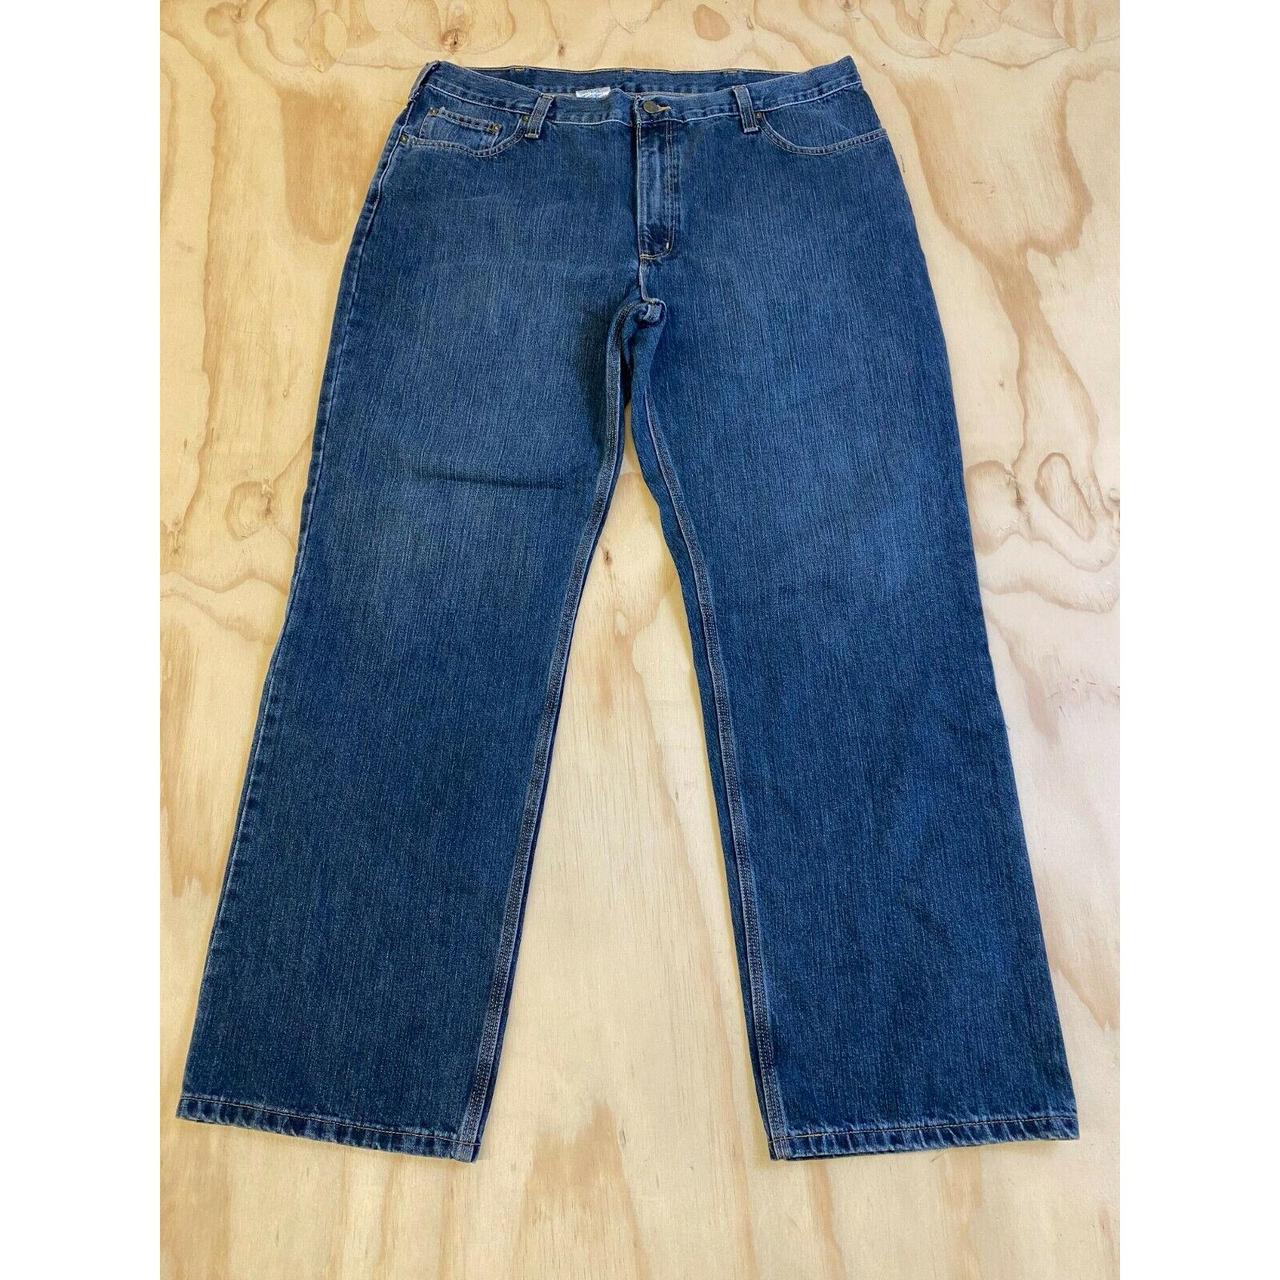 Carhartt Jeans Mens 40x32 Relaxed Fit Med Wash